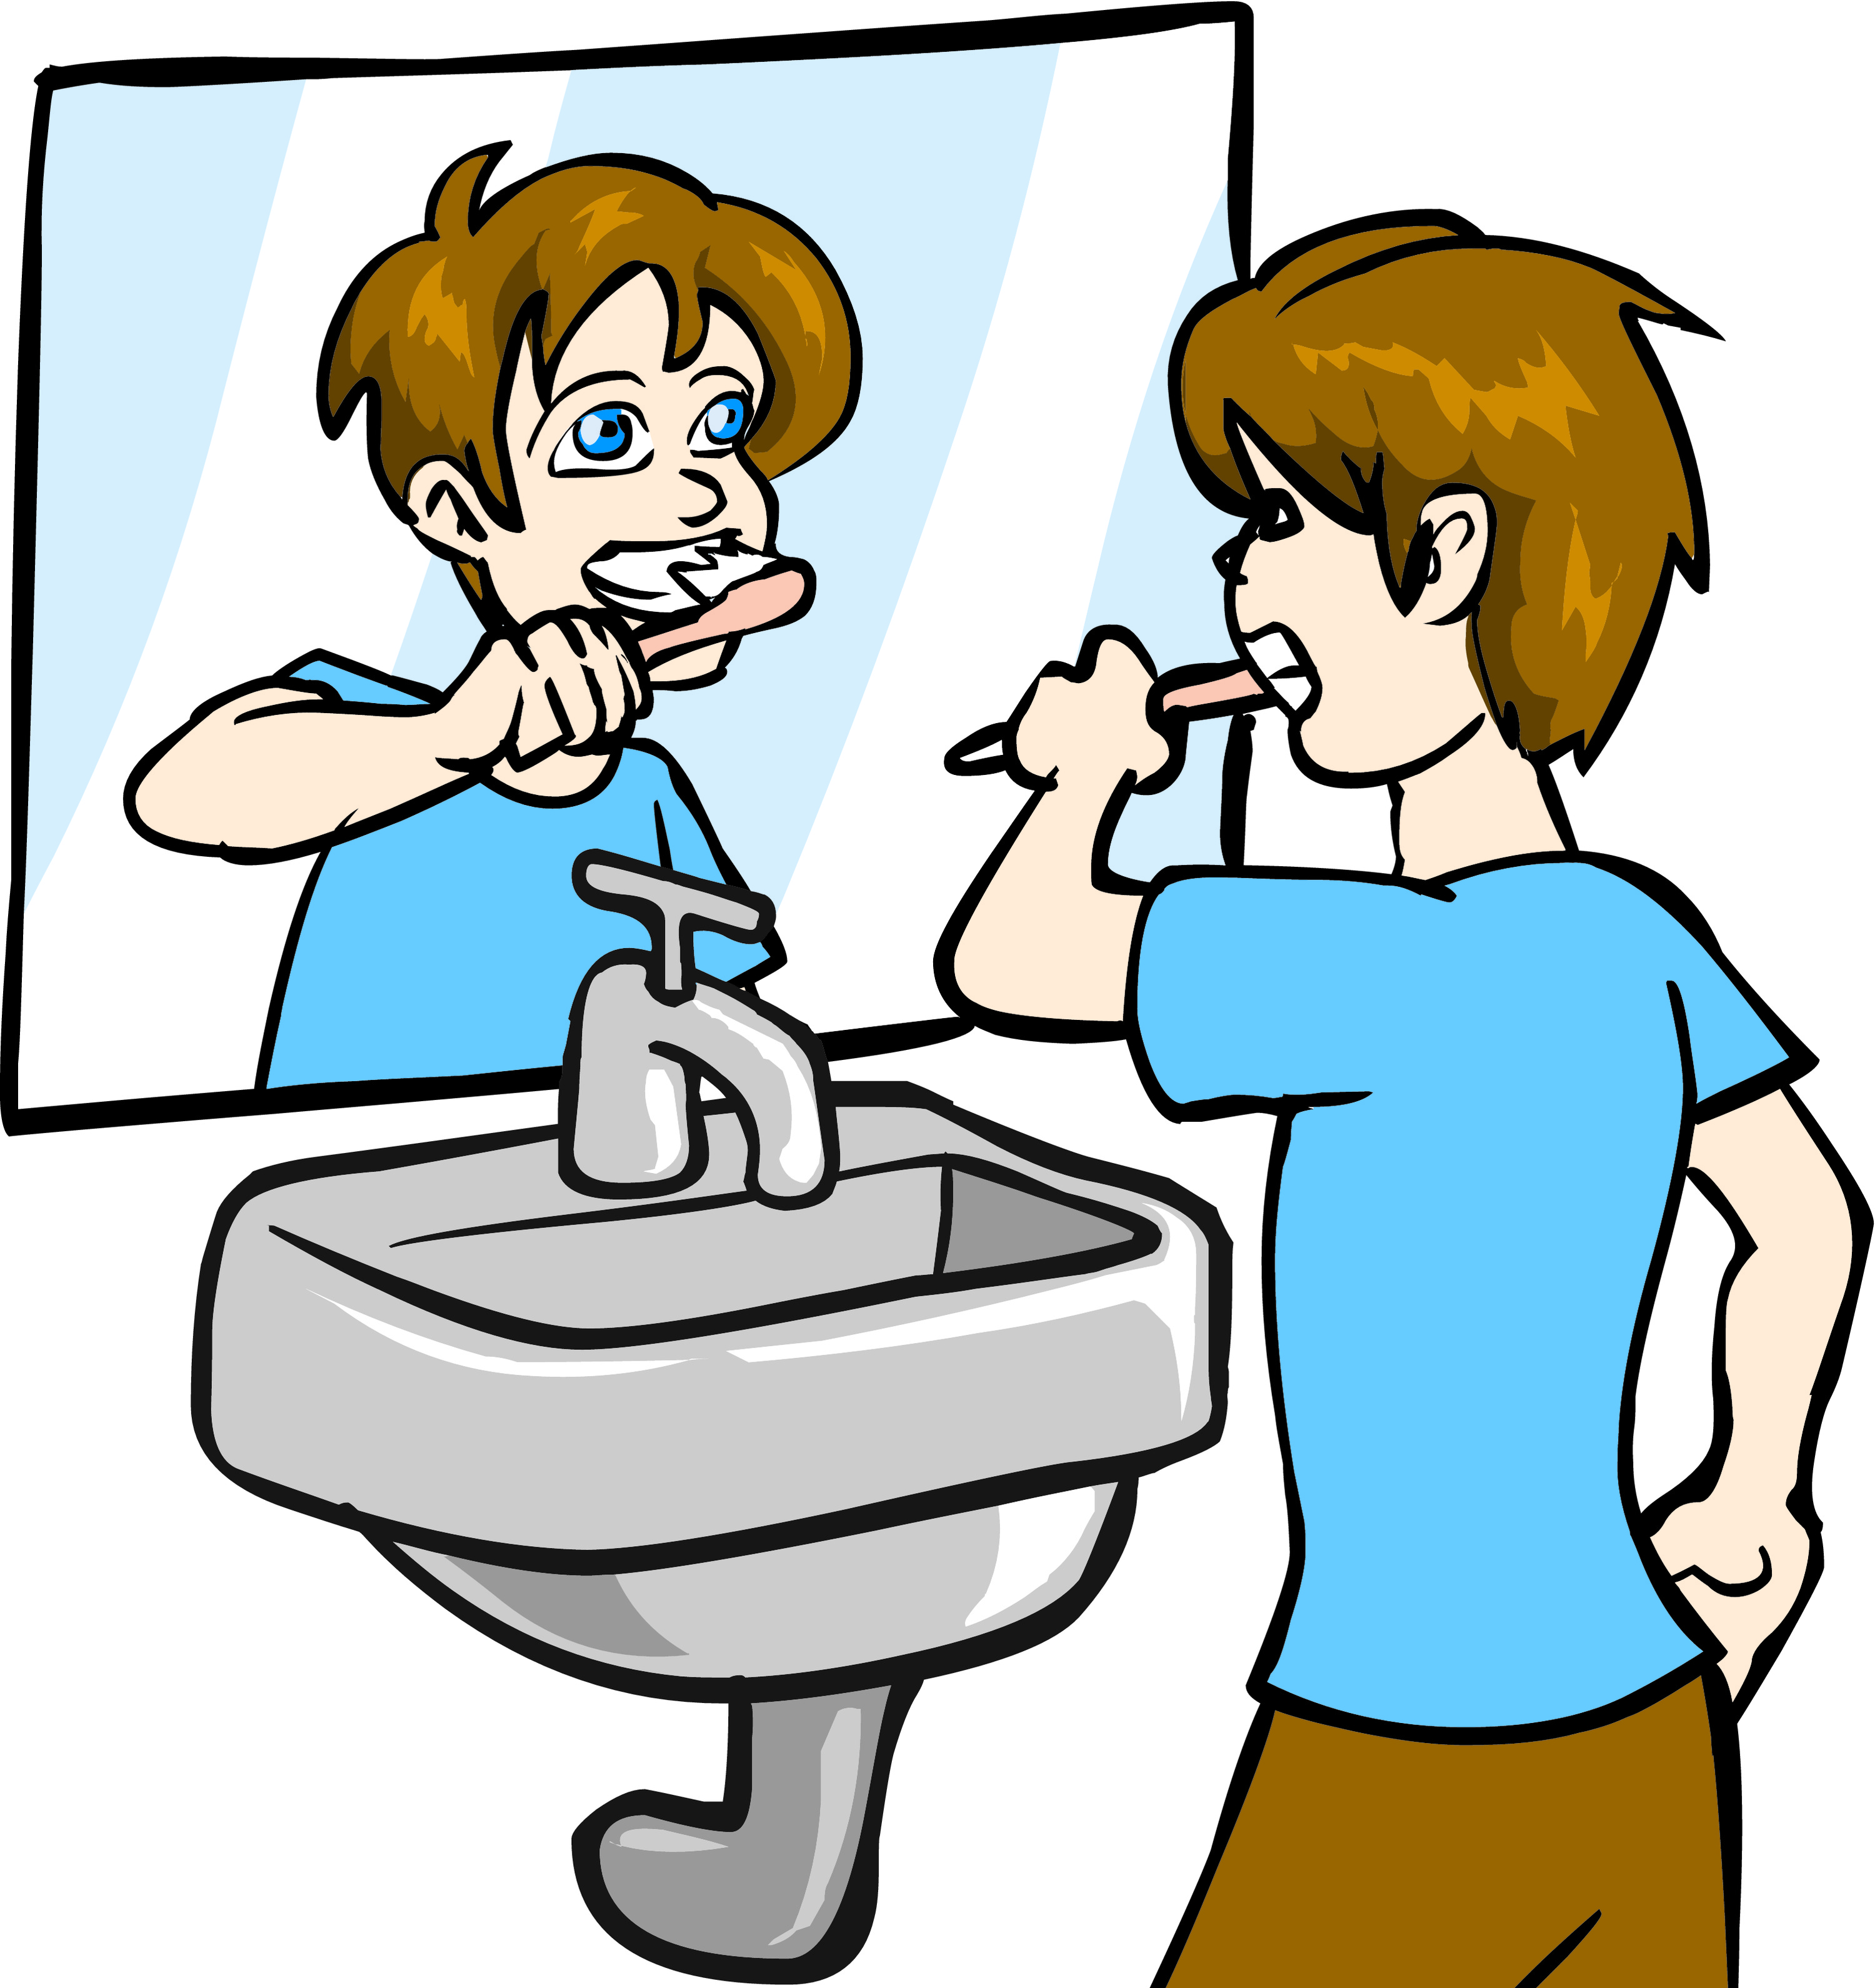 How to Cure Bad Breath by Brushing Your Teeth?